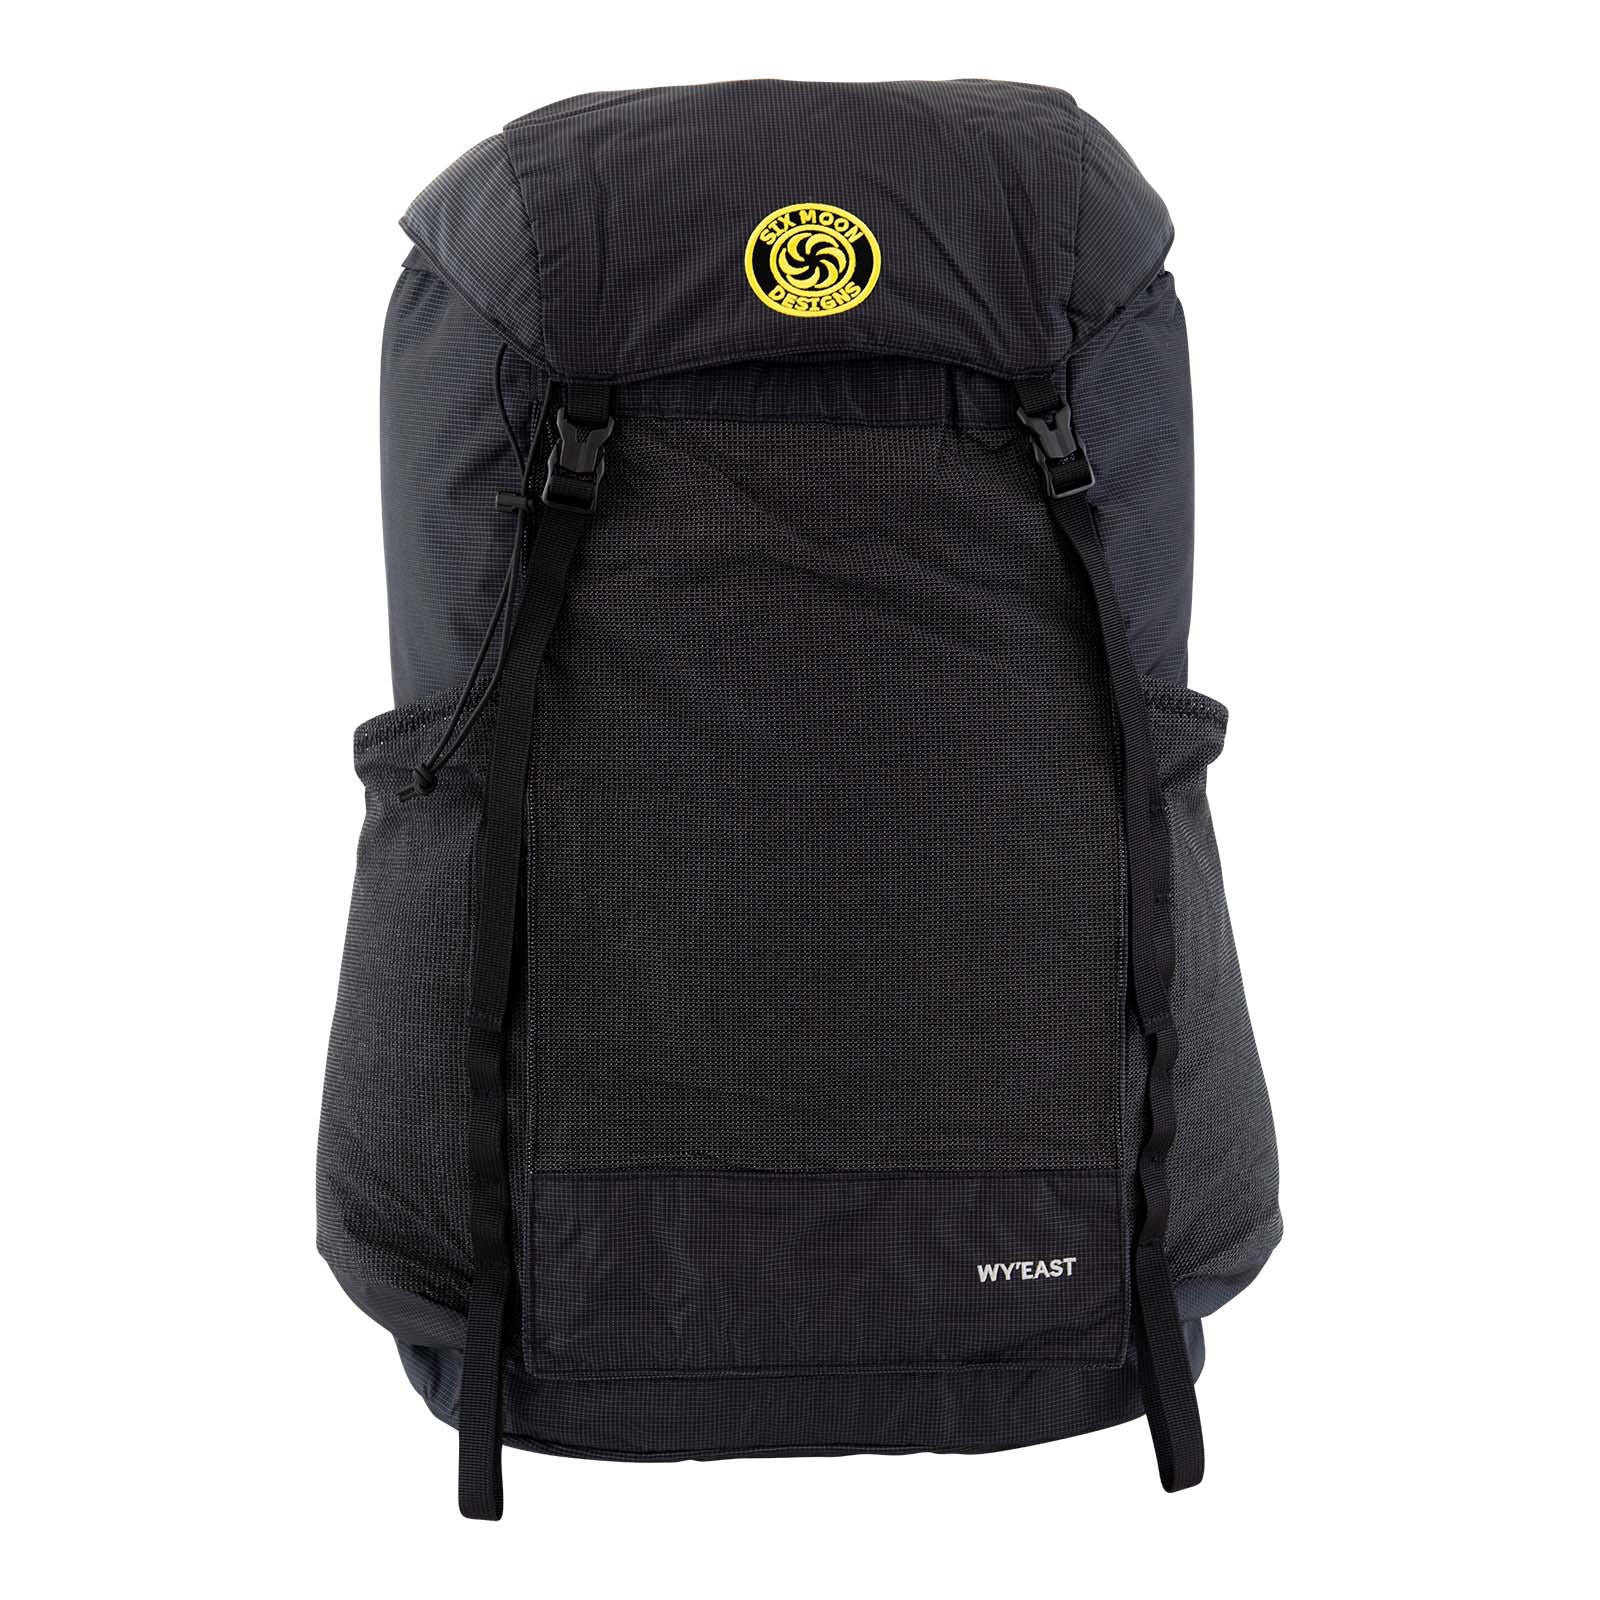 Wy'east Daypack